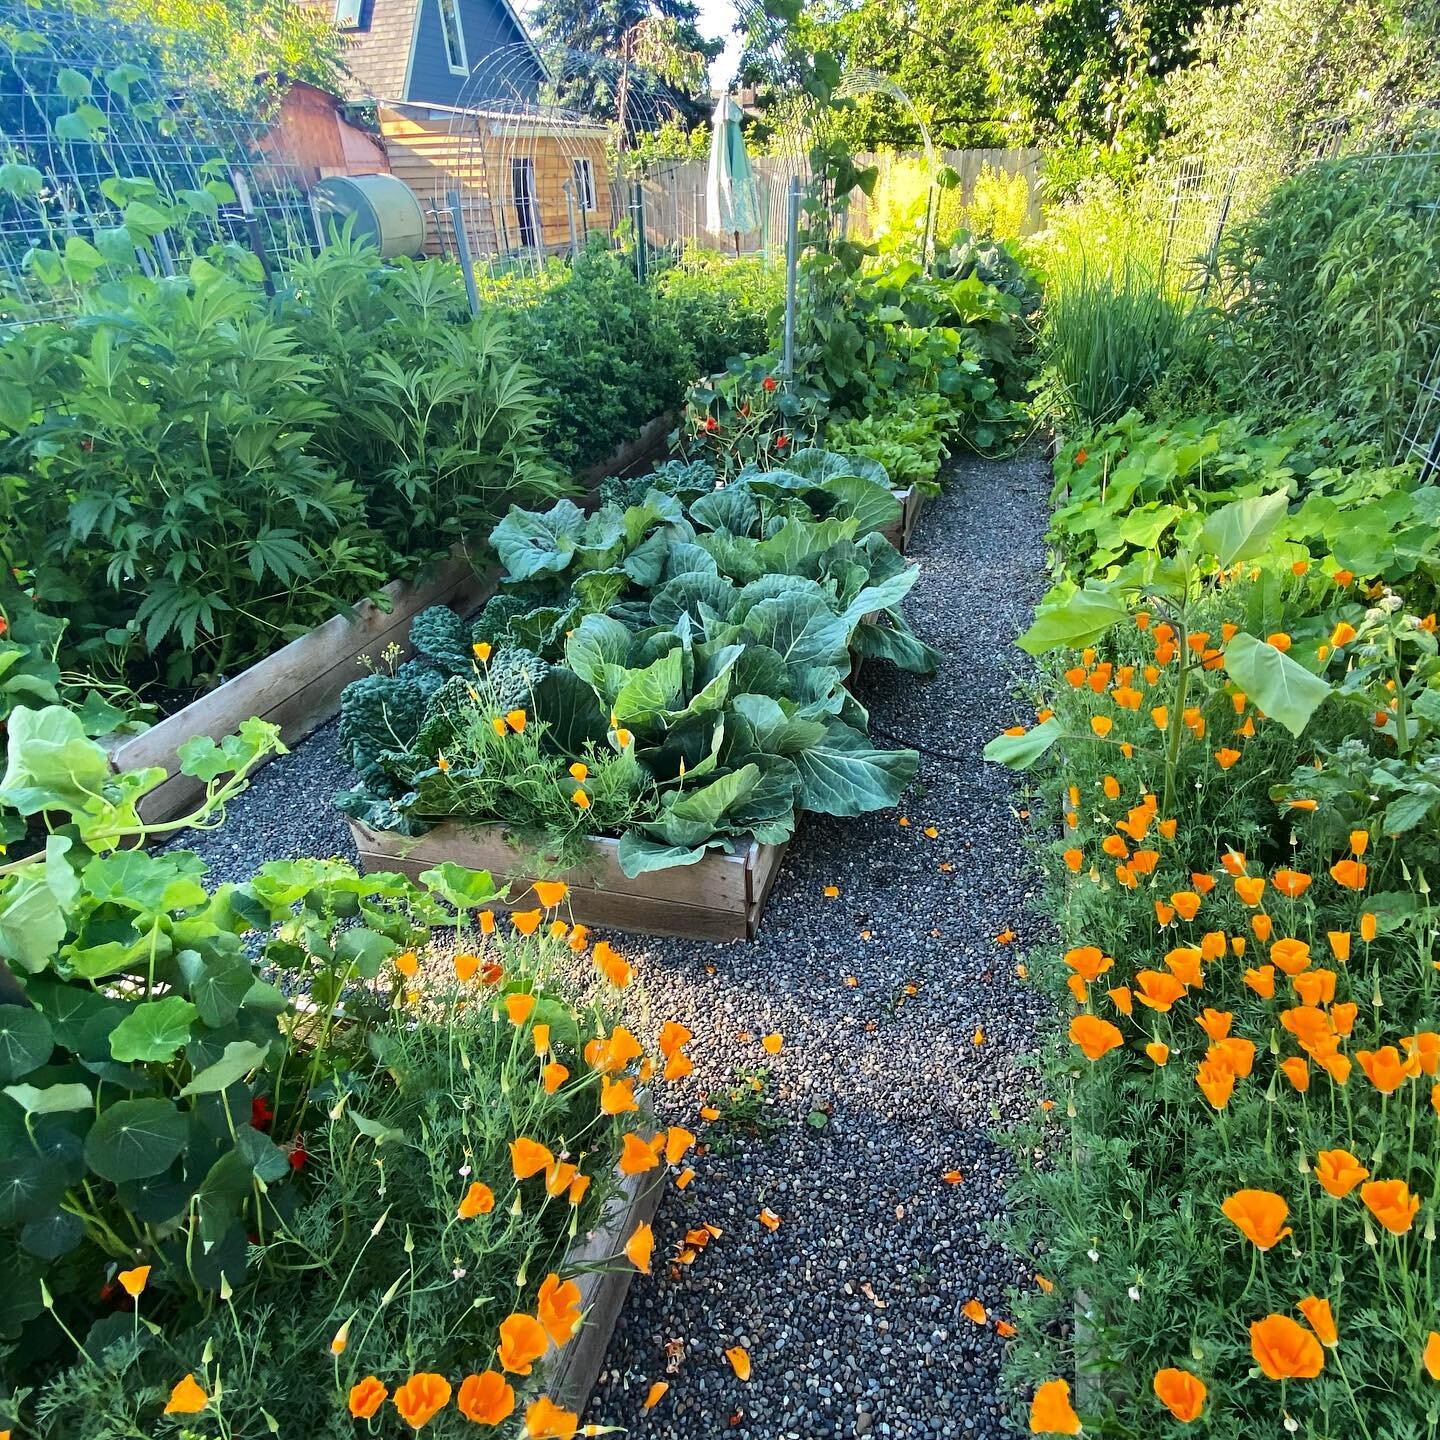 Our garden is really popping with all the warm weather! Best garden we&rsquo;ve ever had- just in time to move to a new property and build another one 😂

#backyarddesign #backyardgarden #gardener #gardenersworld #gardenideas #gardening #gardening101